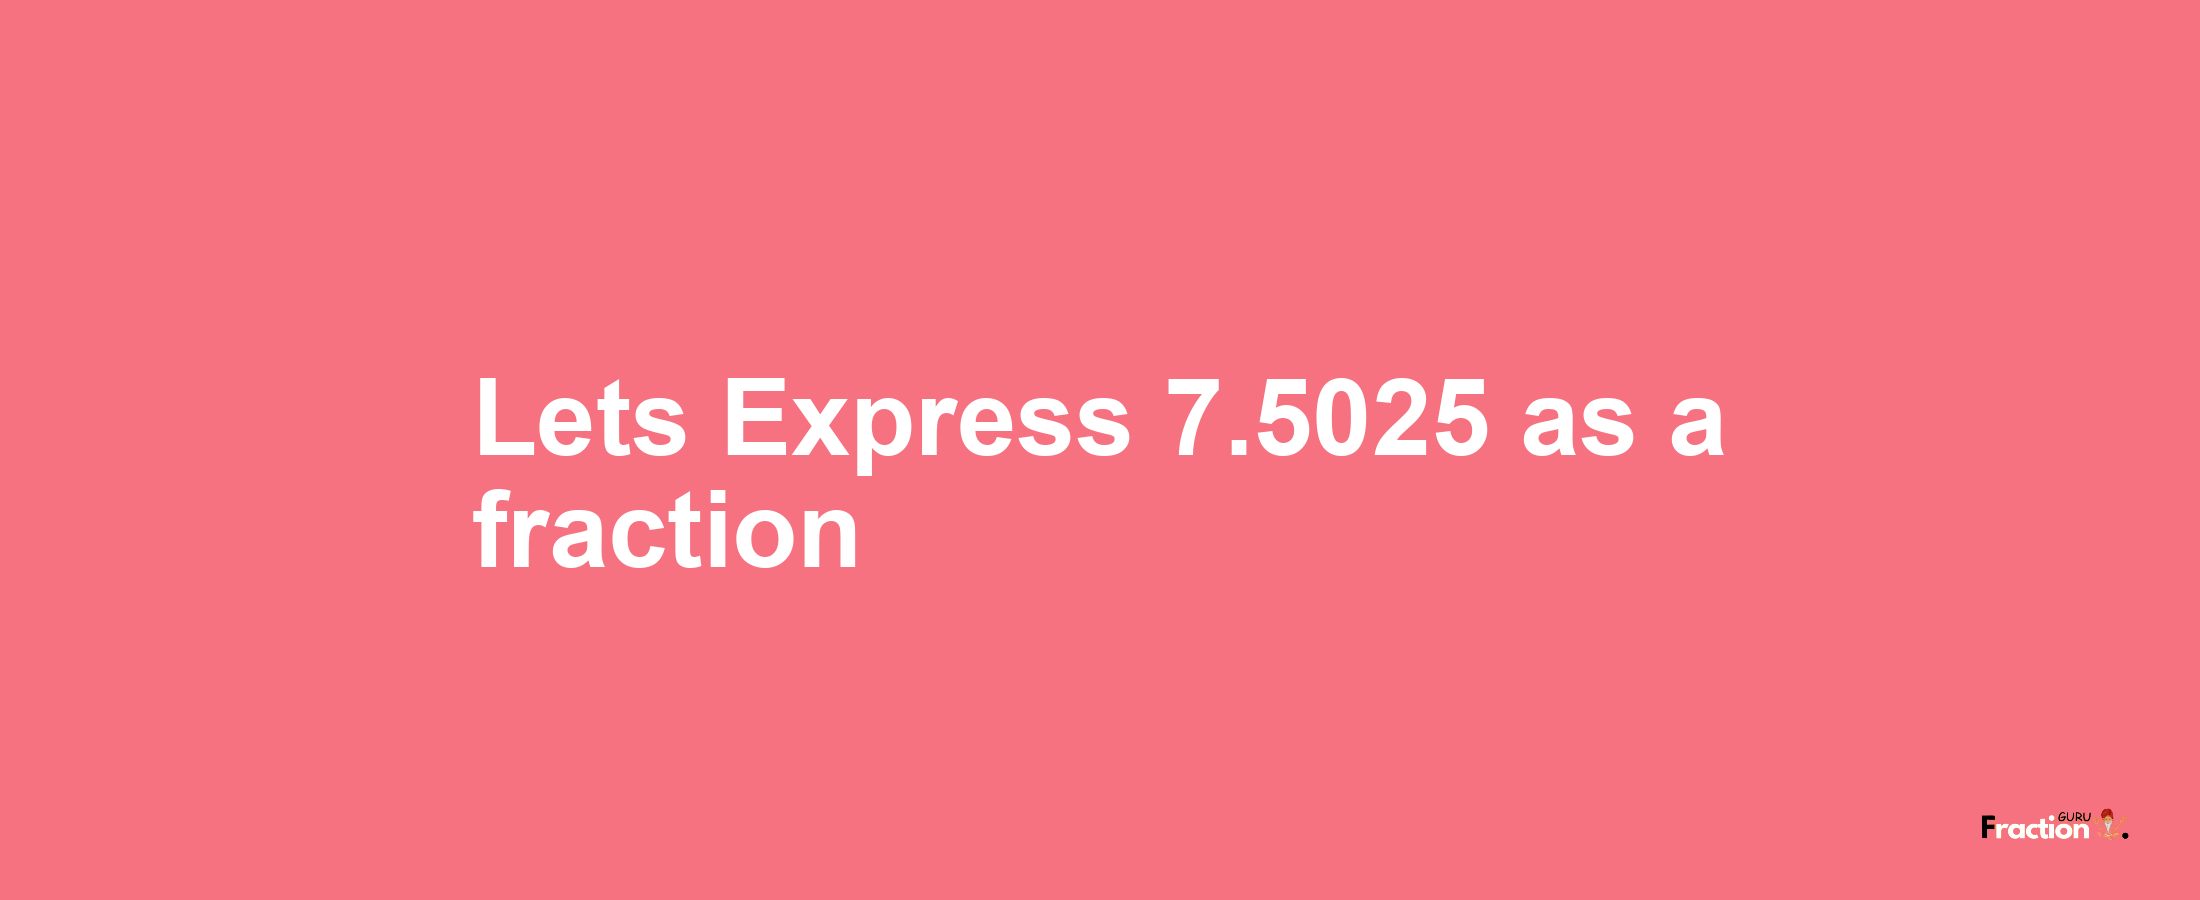 Lets Express 7.5025 as afraction